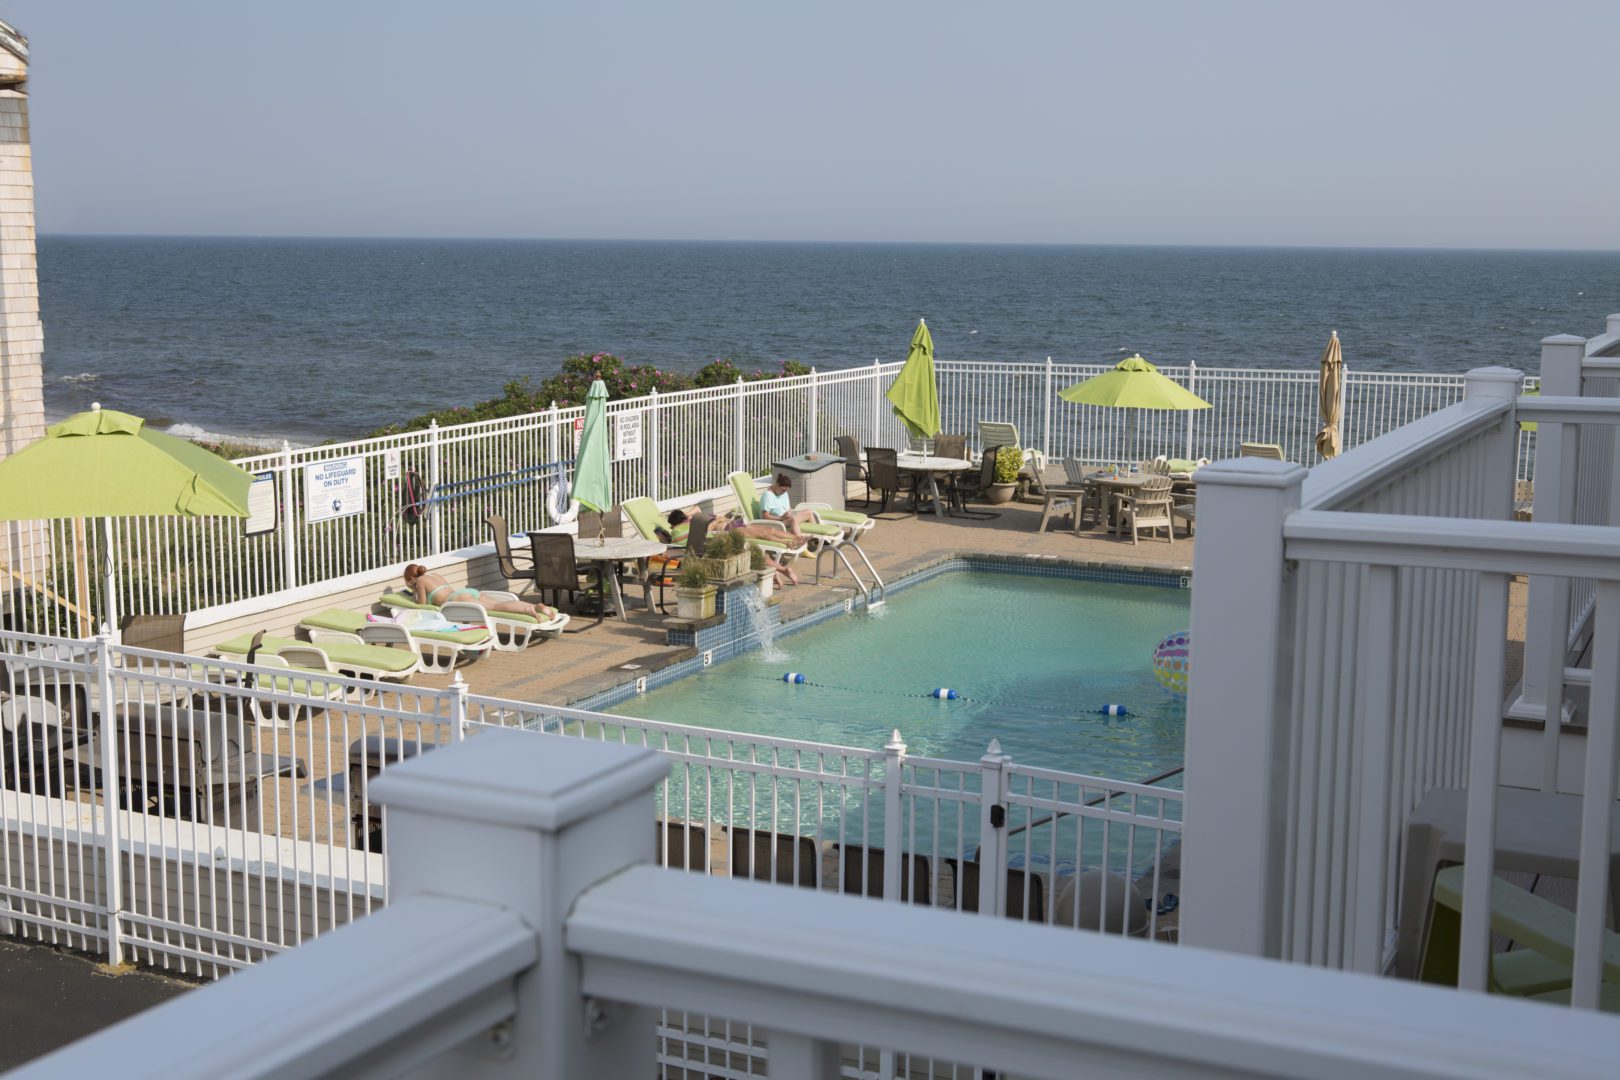 Deluxe Ocean View Balcony at The Corsair & Crossrip Resort on Cape Cod